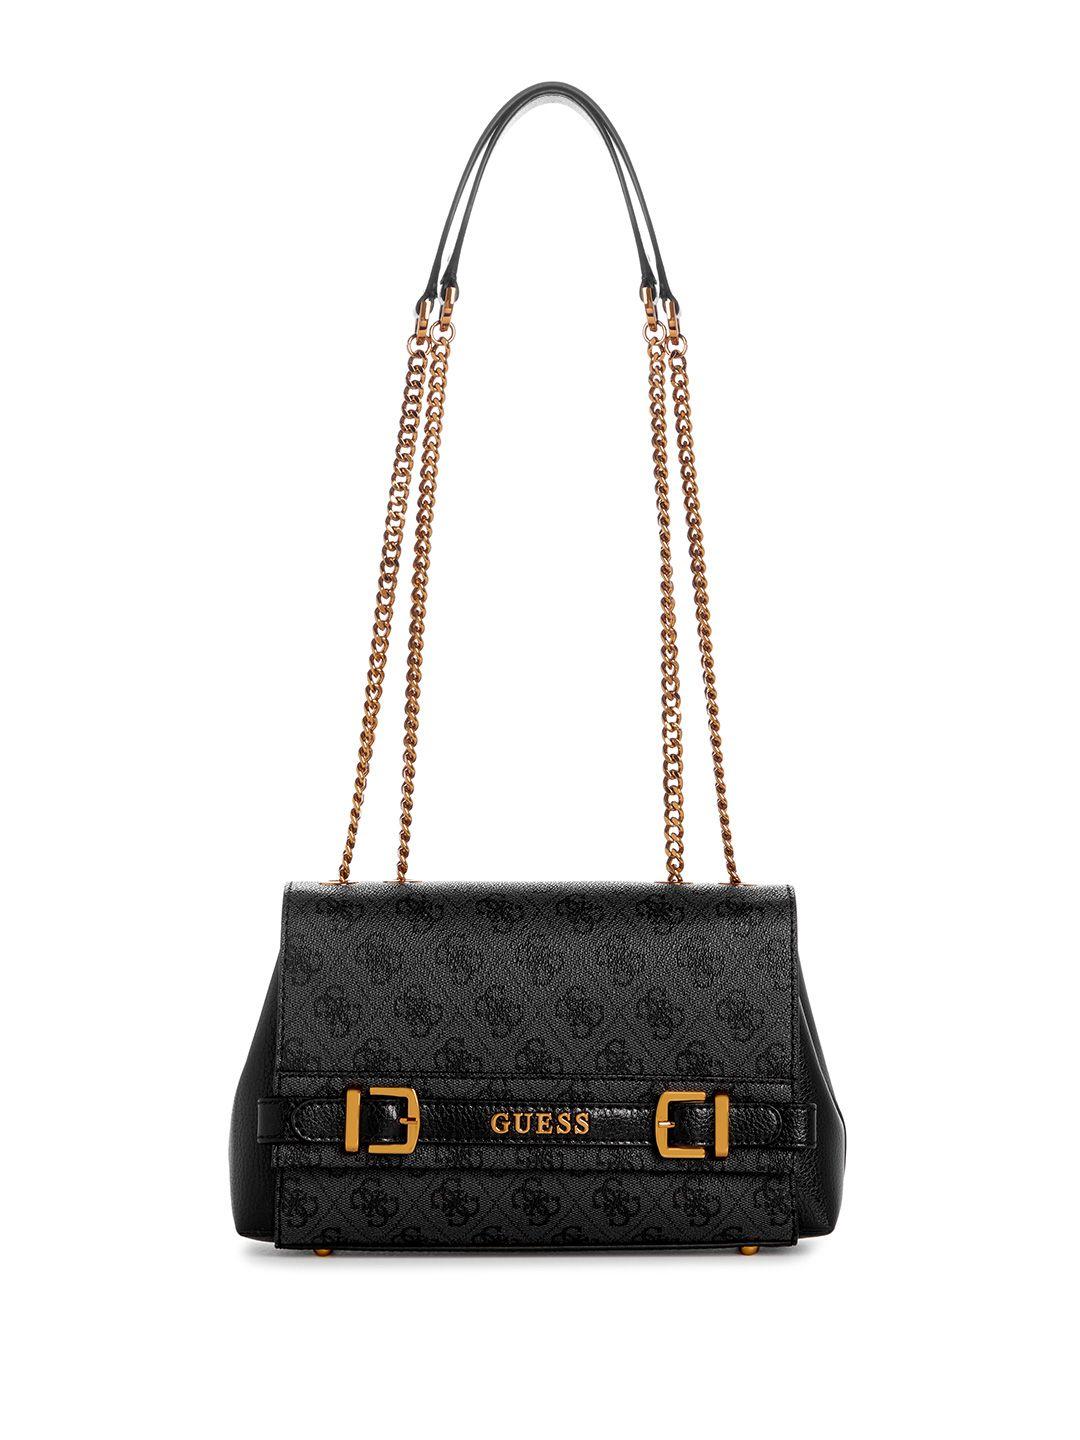 guess brand logo printed structured shoulder bag with buckle detail